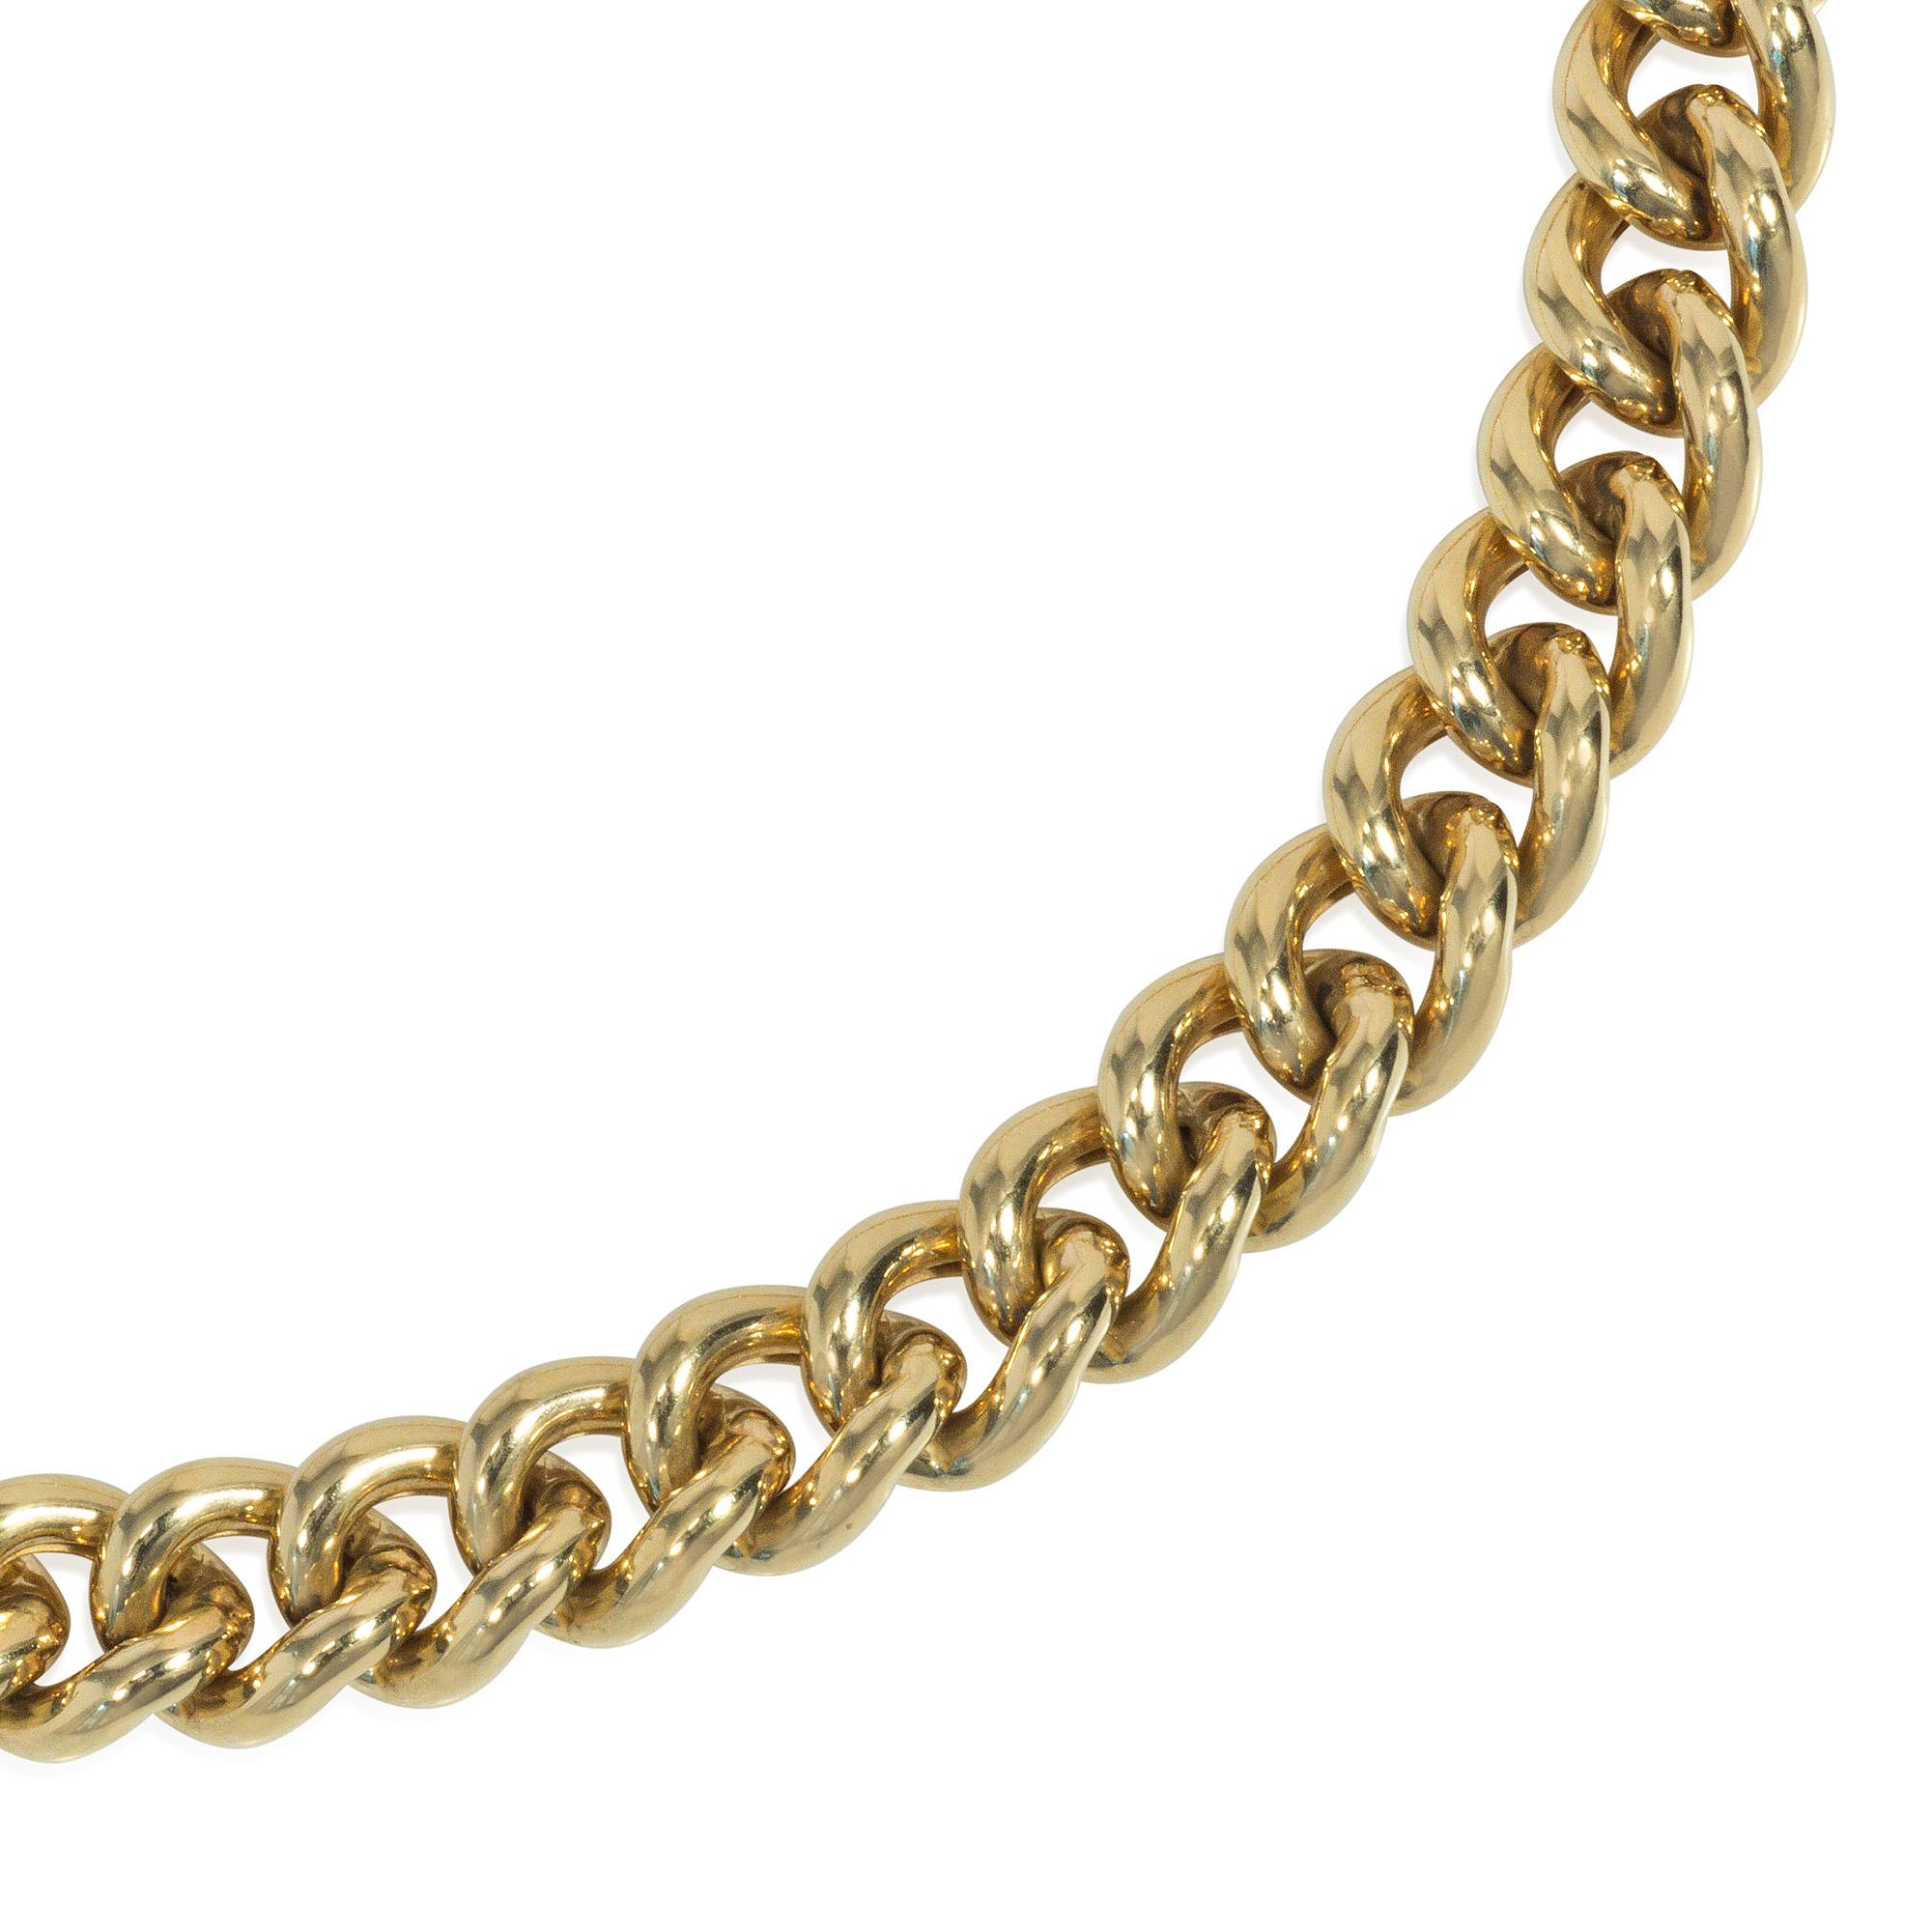 An estate gold collar length curb link chain necklace in 18k.  Italy